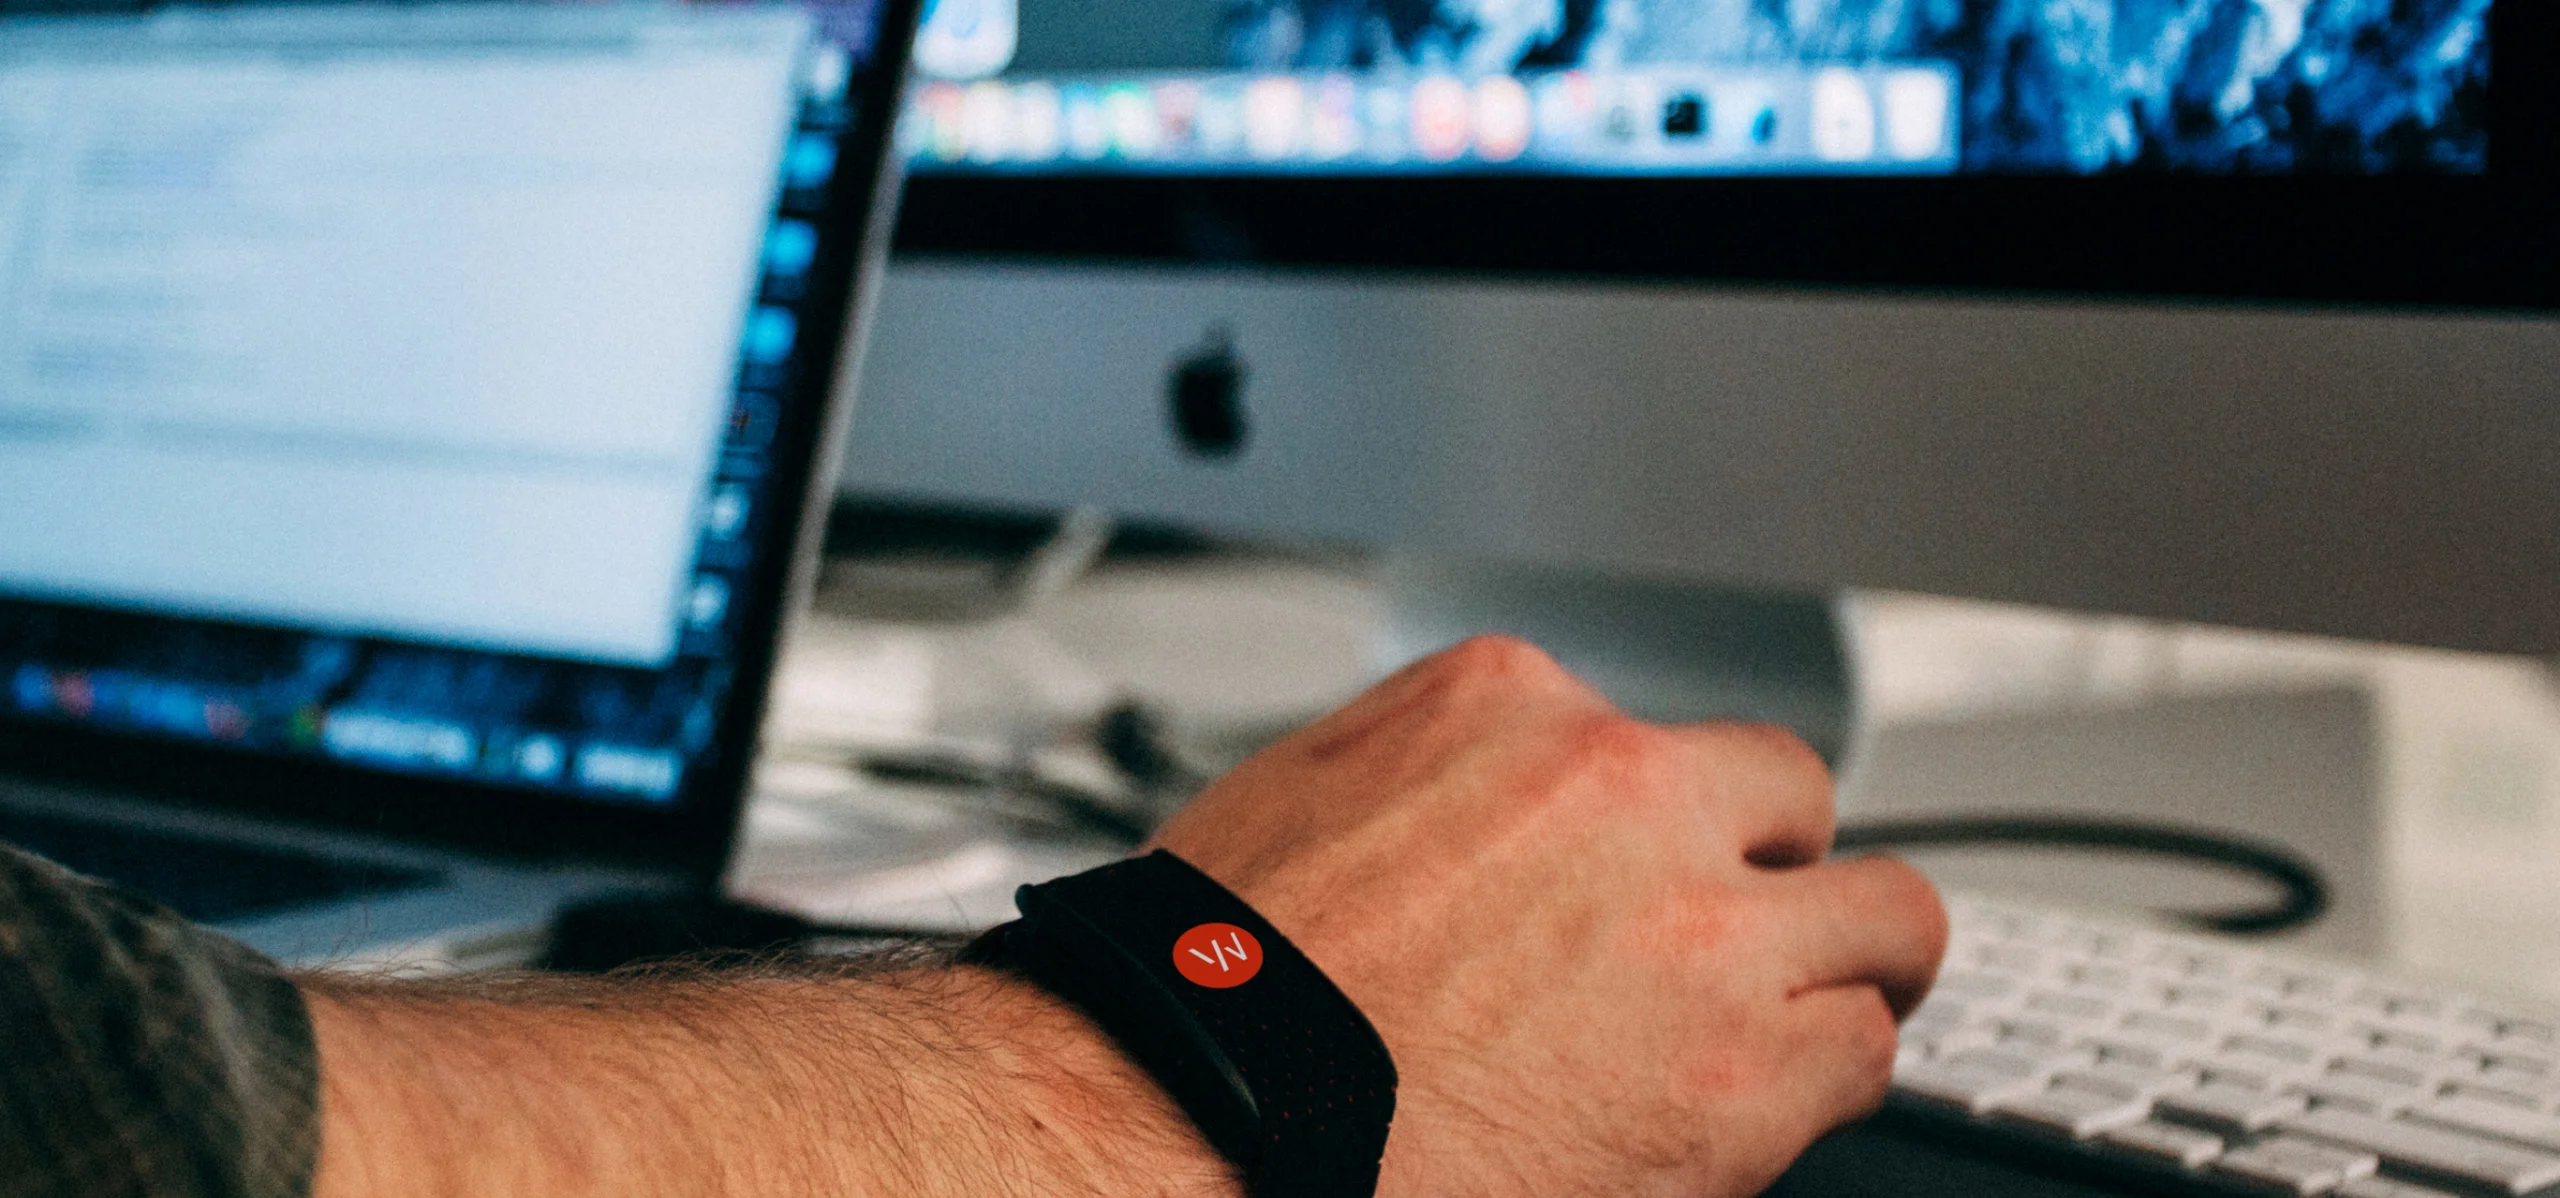 The Value of Wearables at Work&#8211;Who Sees the Data?